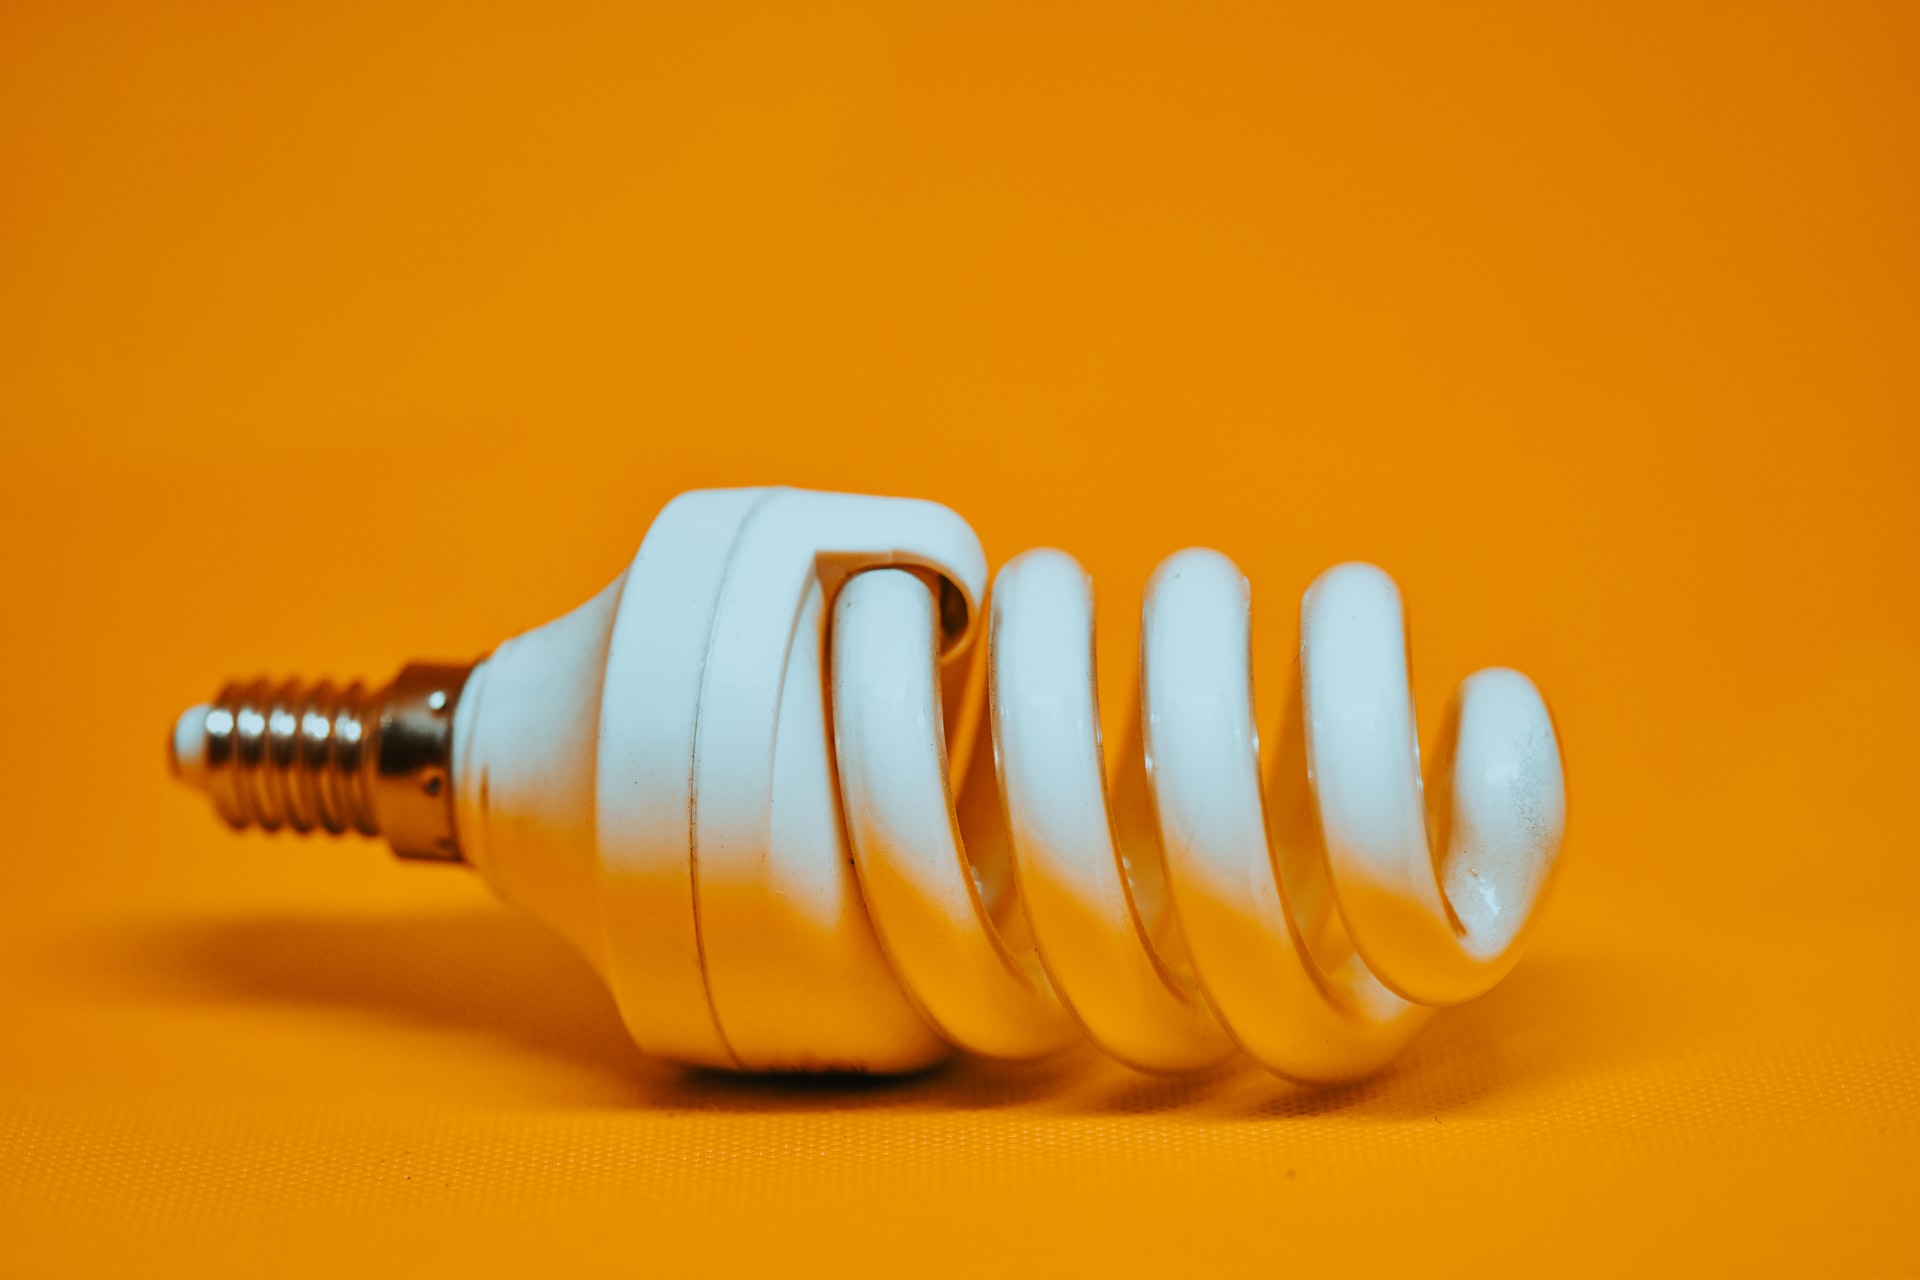 An energy efficient lightbulb against a yellow background